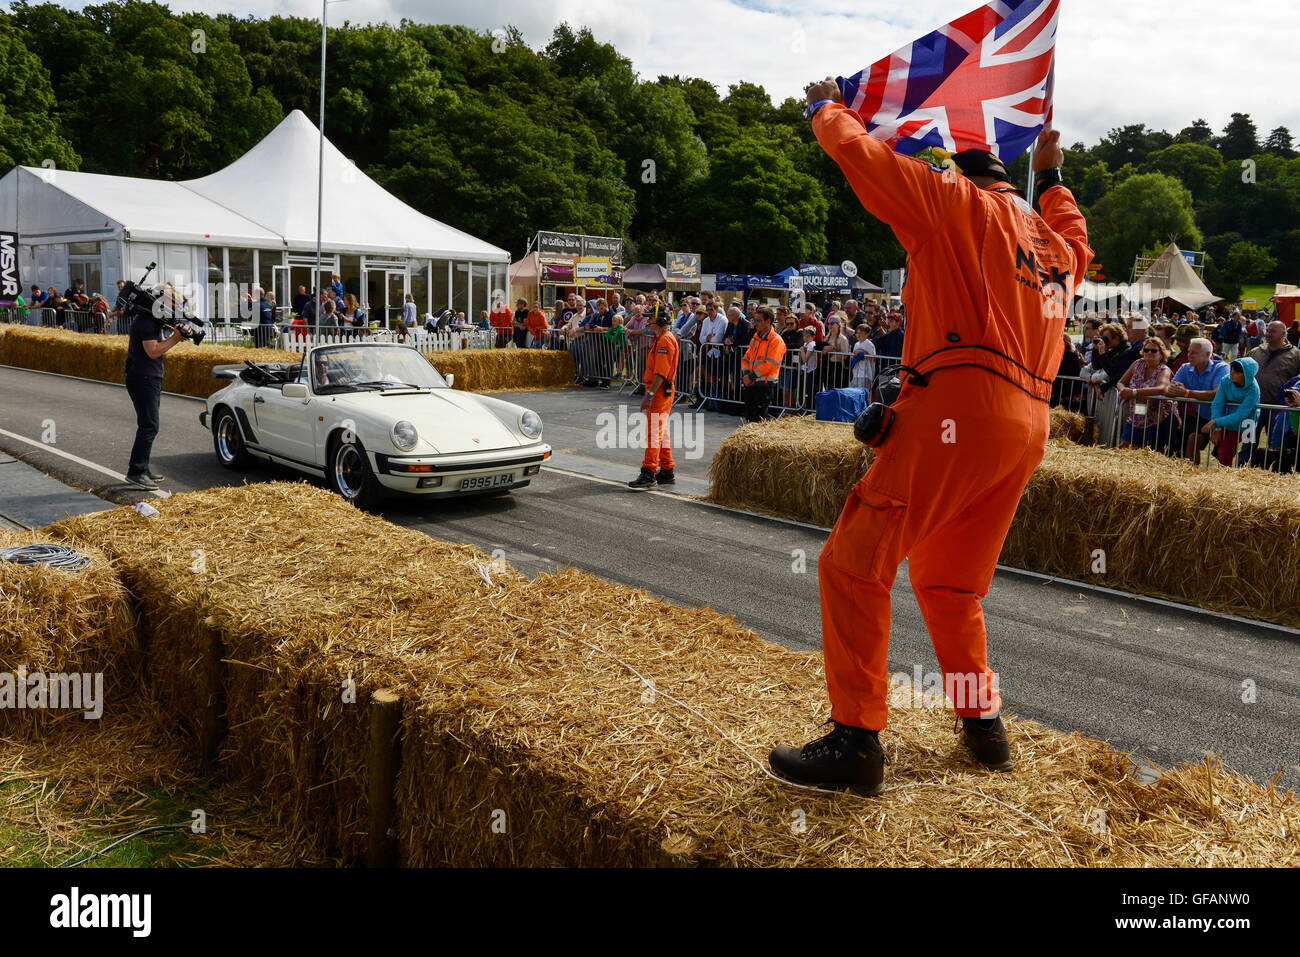 Carfest North, Bolesworth, Cheshire, UK. 30th July 2016. A Porsche at the start of the track sprint. The event is the brainchild of Chris Evans and features 3 days of cars, music and entertainment with profits being donated to the charity Children in Need. Andrew Paterson/Alamy Live News Stock Photo